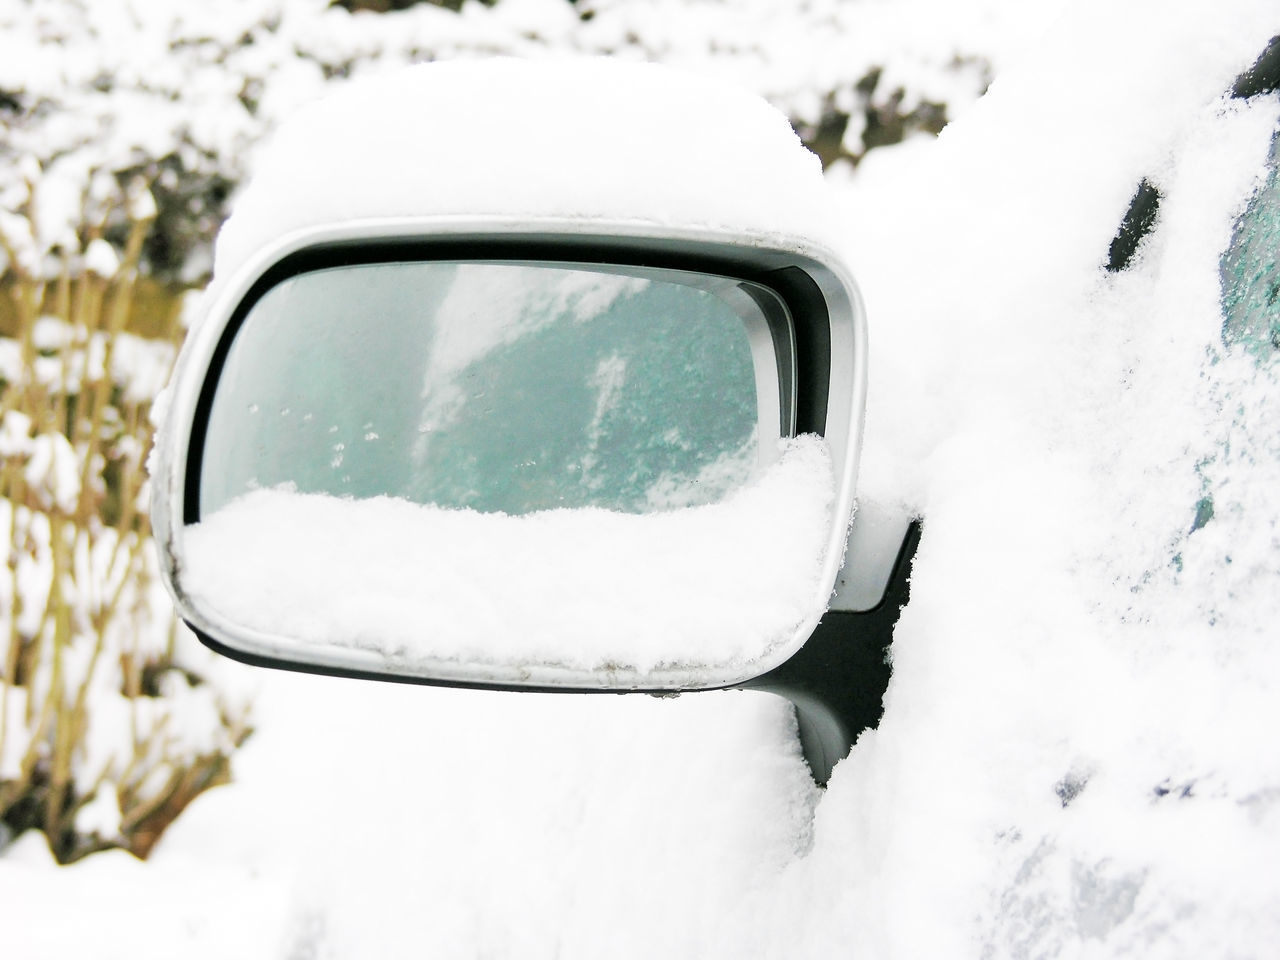 CLOSE-UP OF SNOW COVERED CAR ON LANDSCAPE